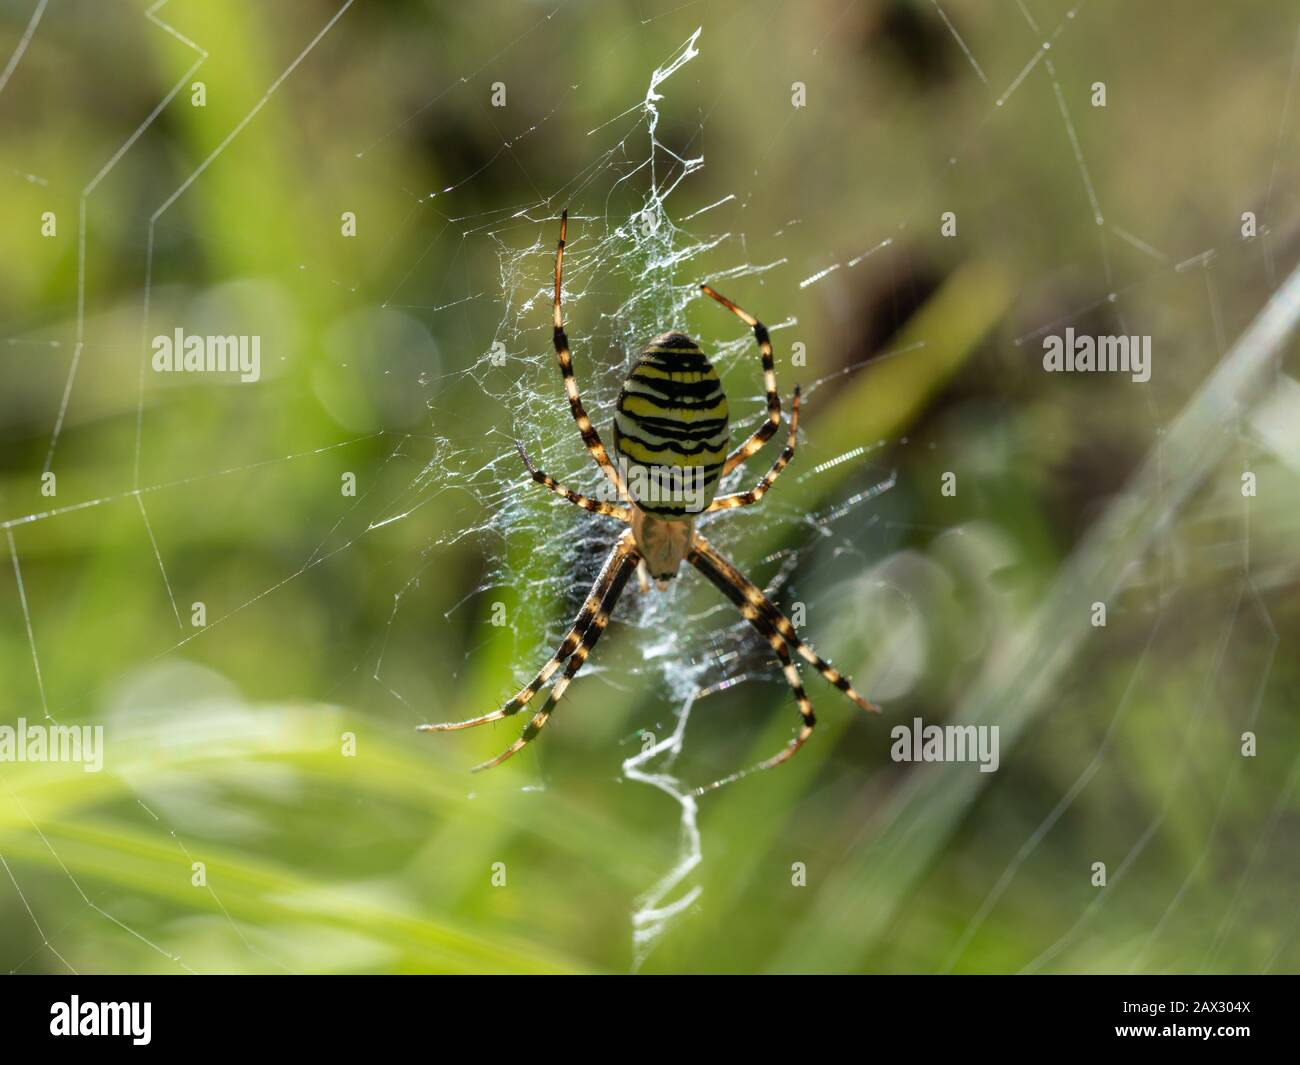 Female Wasp Spider on a Web Stock Photo